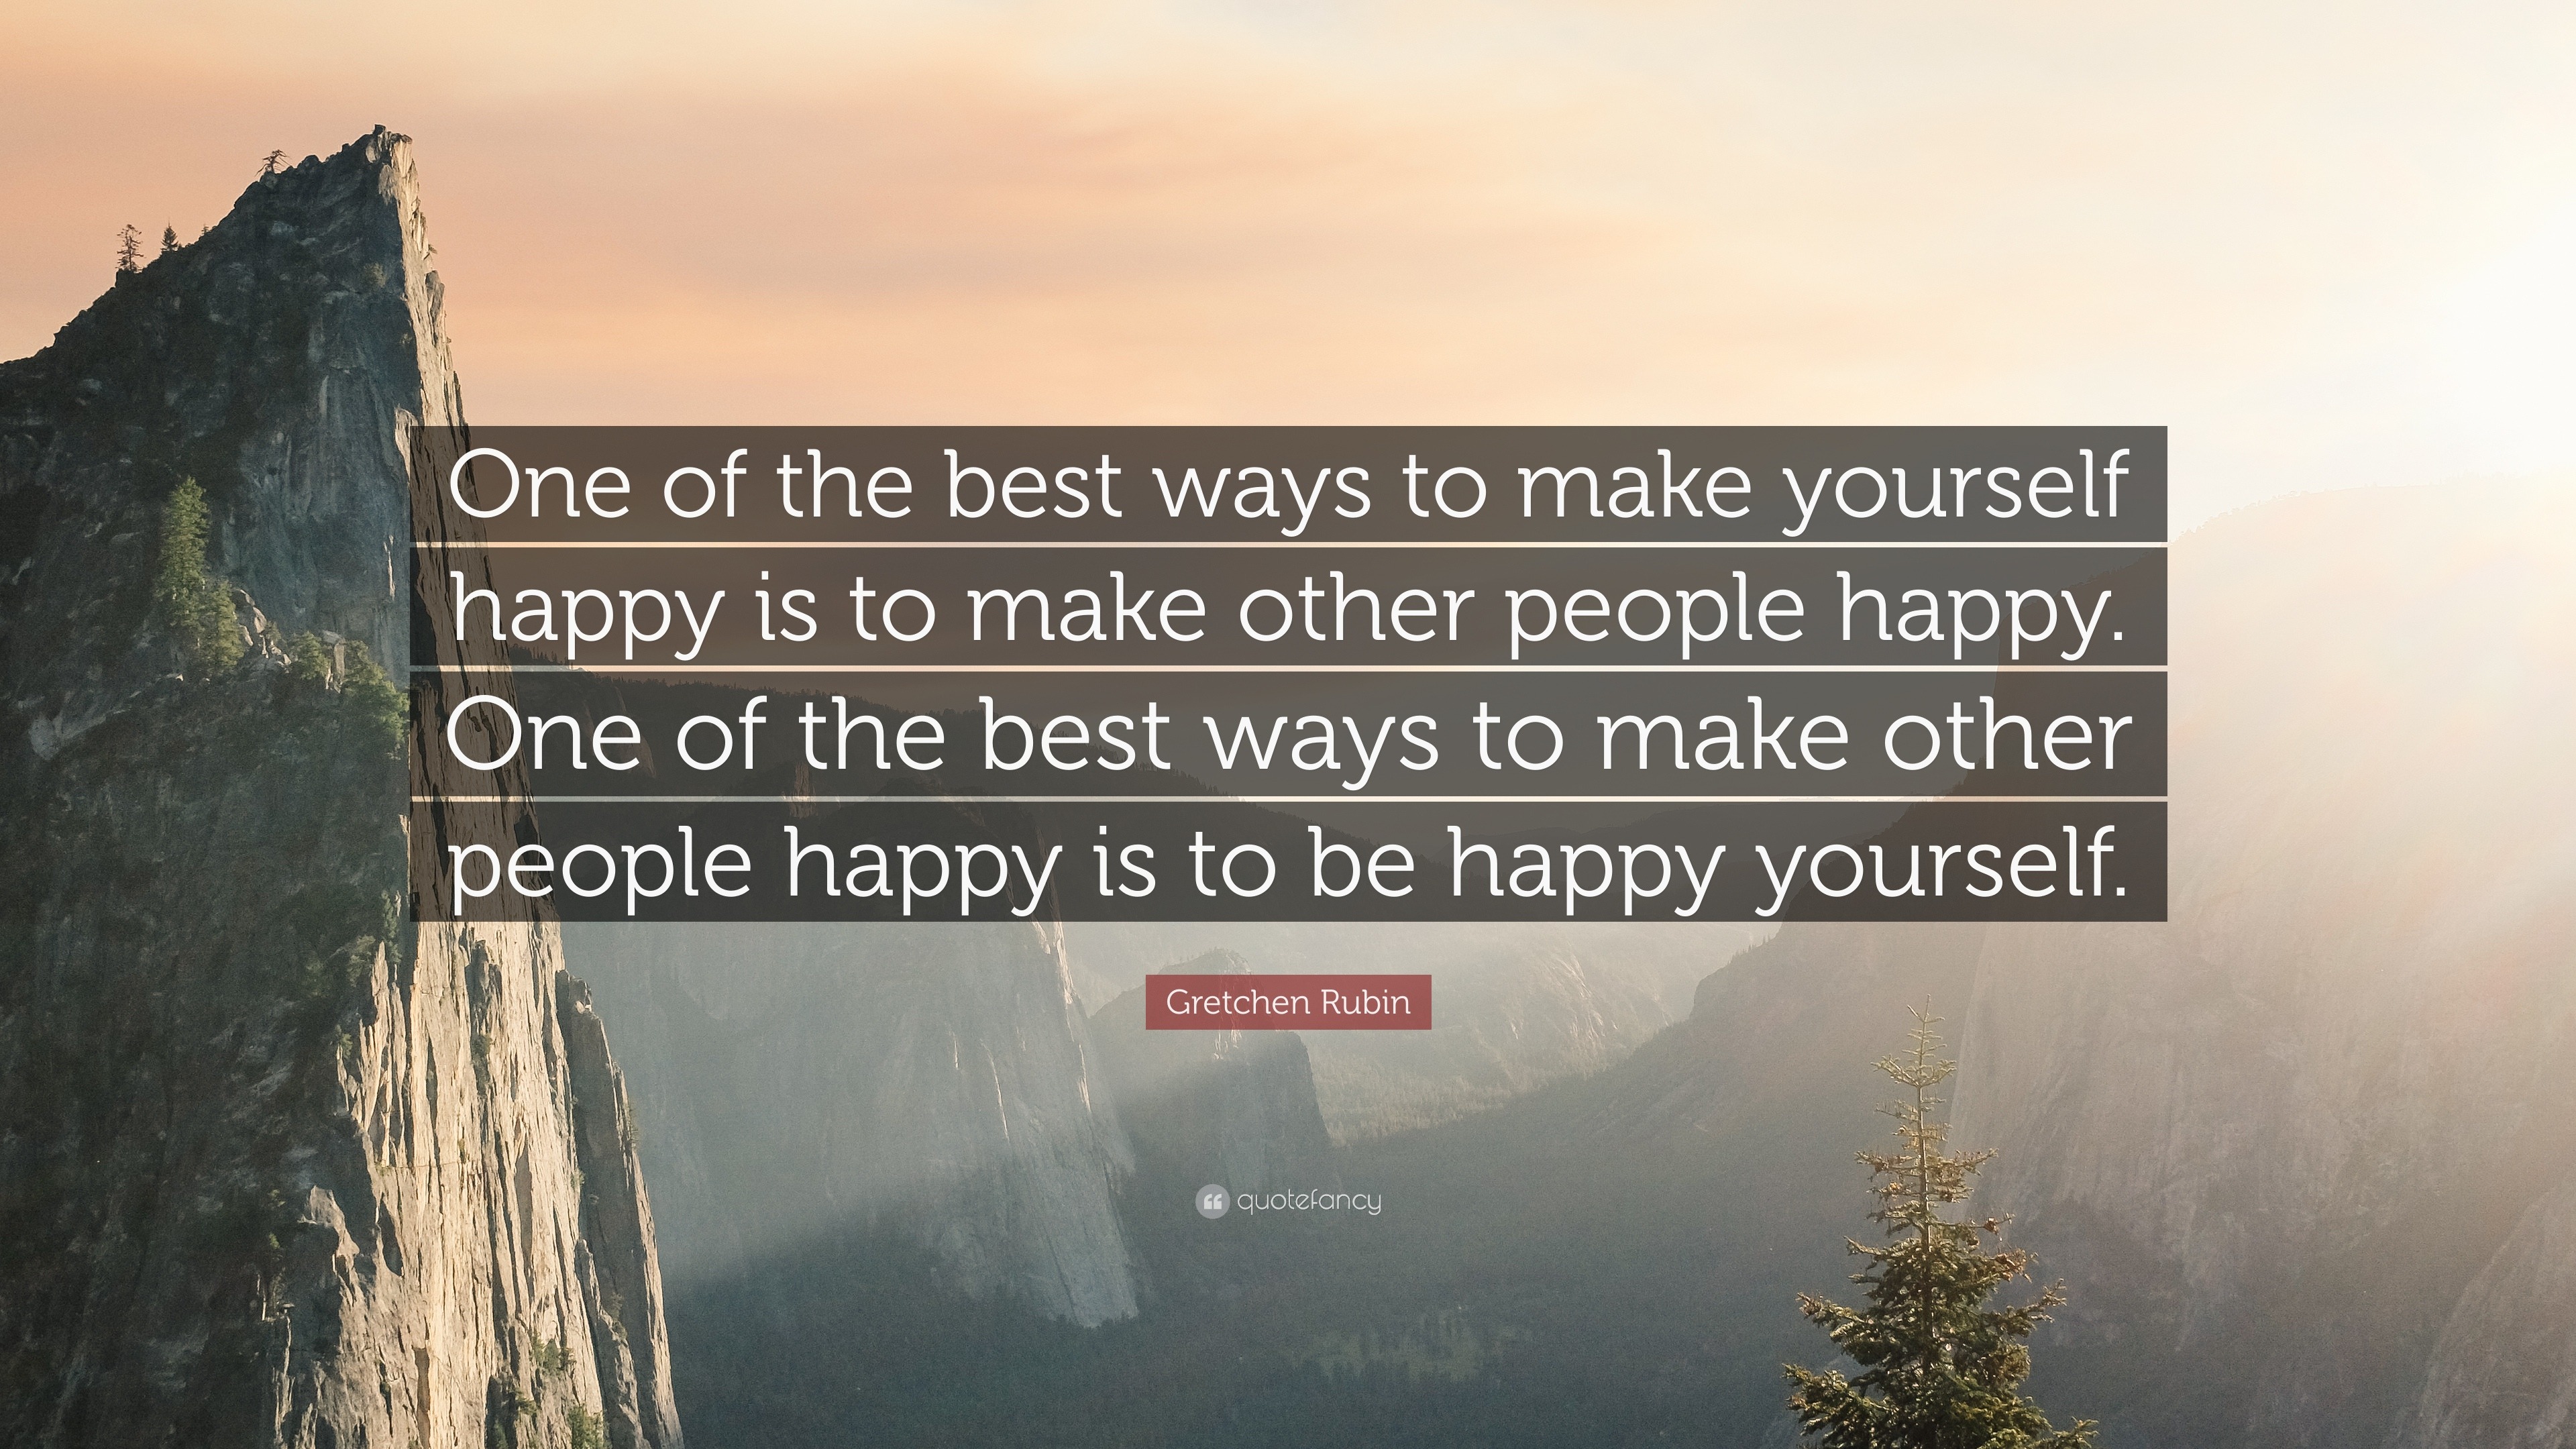 Gretchen Rubin Quote: “One of the best ways to make yourself happy is to  make other people happy. One of the best ways to make other people hap...”